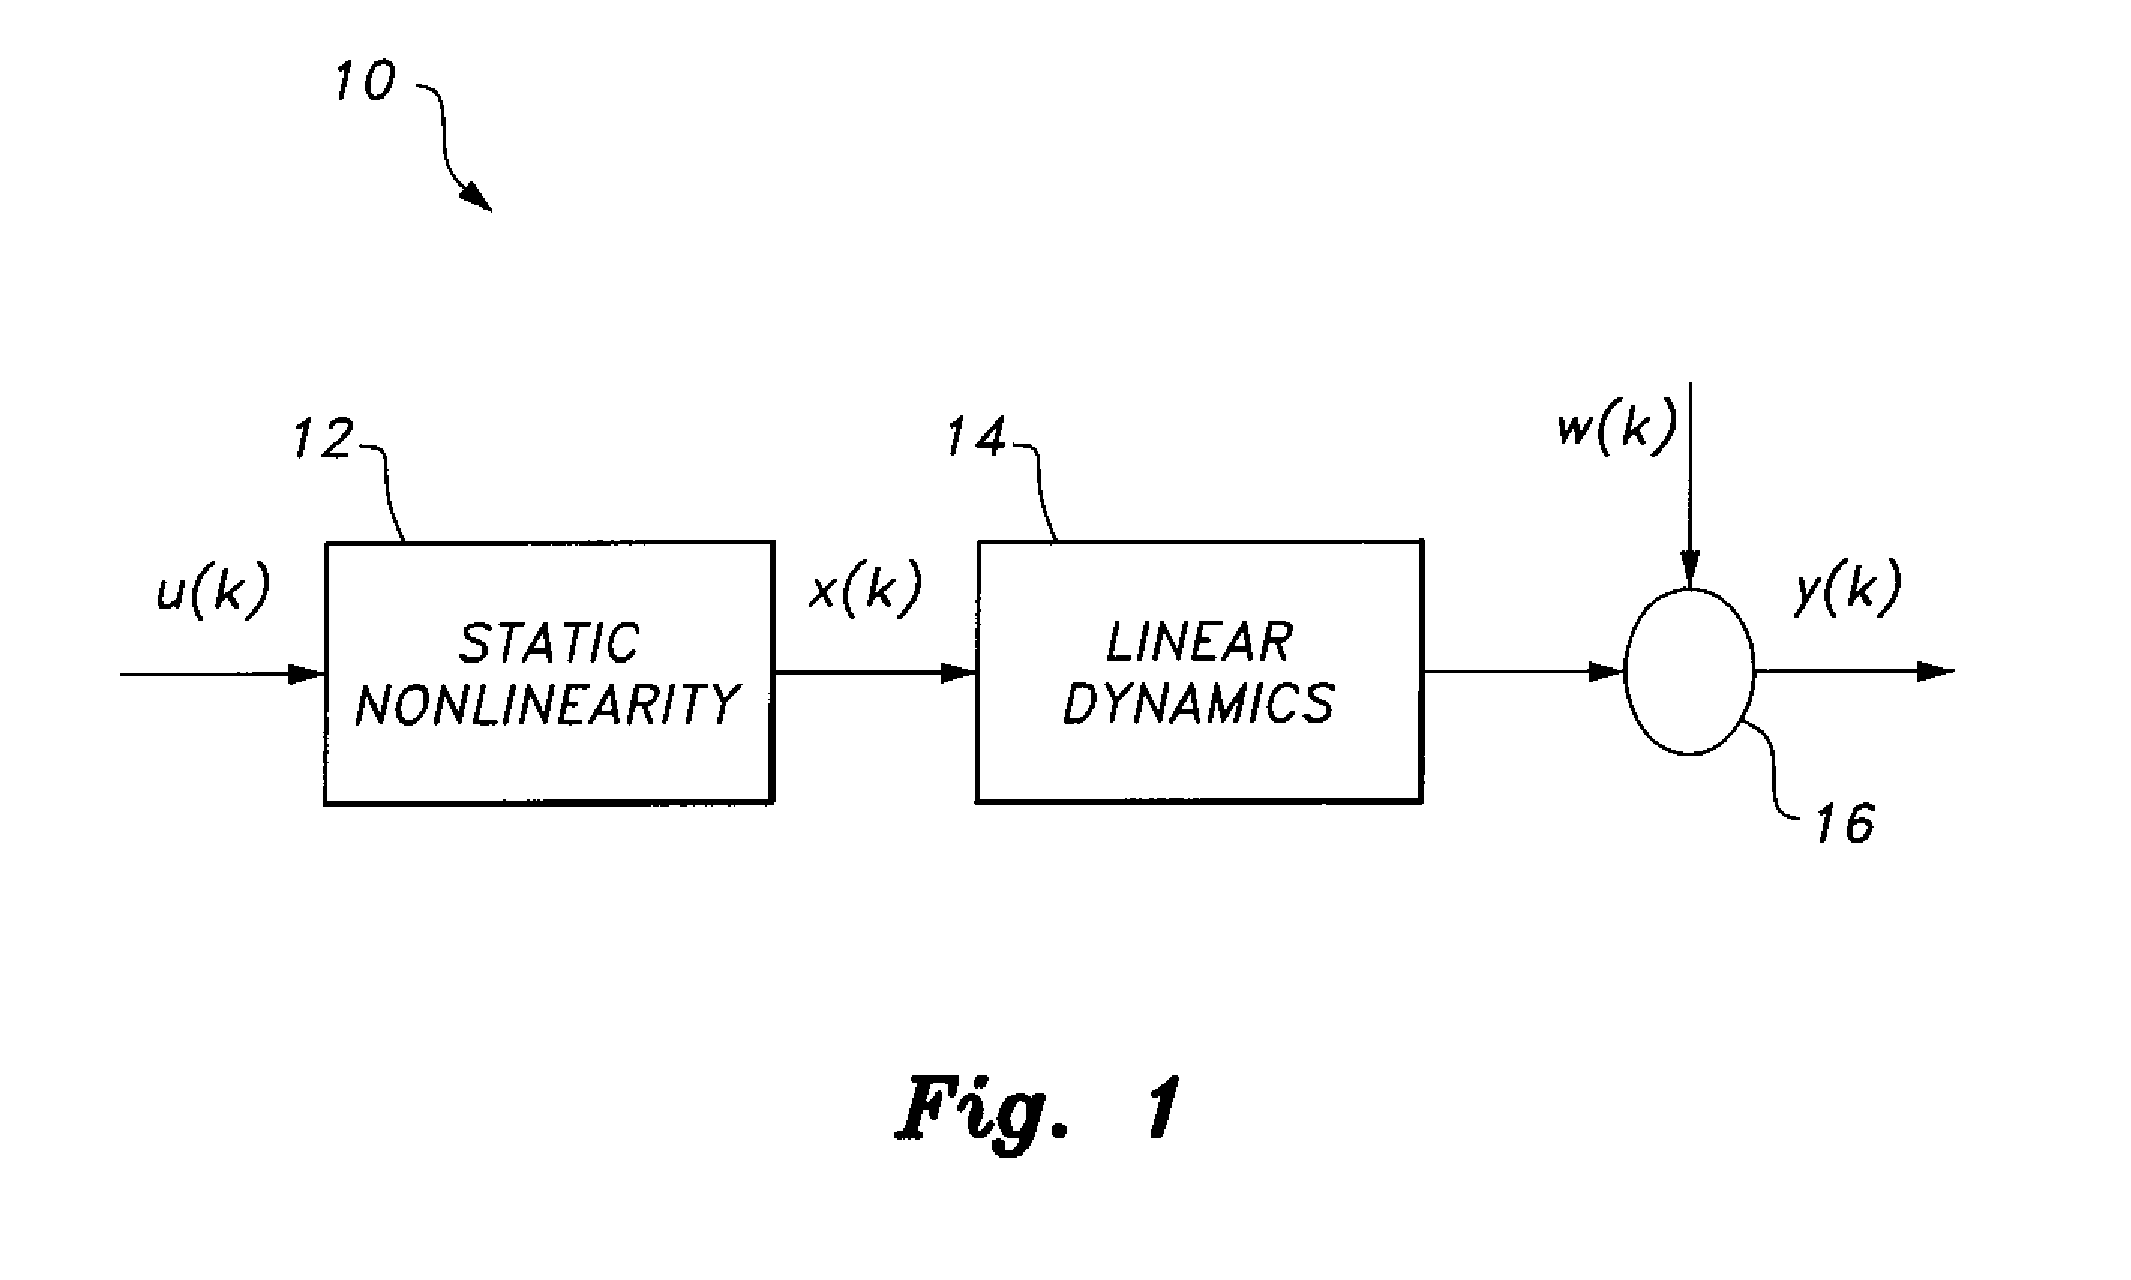 Method of identifying Hammerstein models with known nonlinearity structures using particle swarm optimization